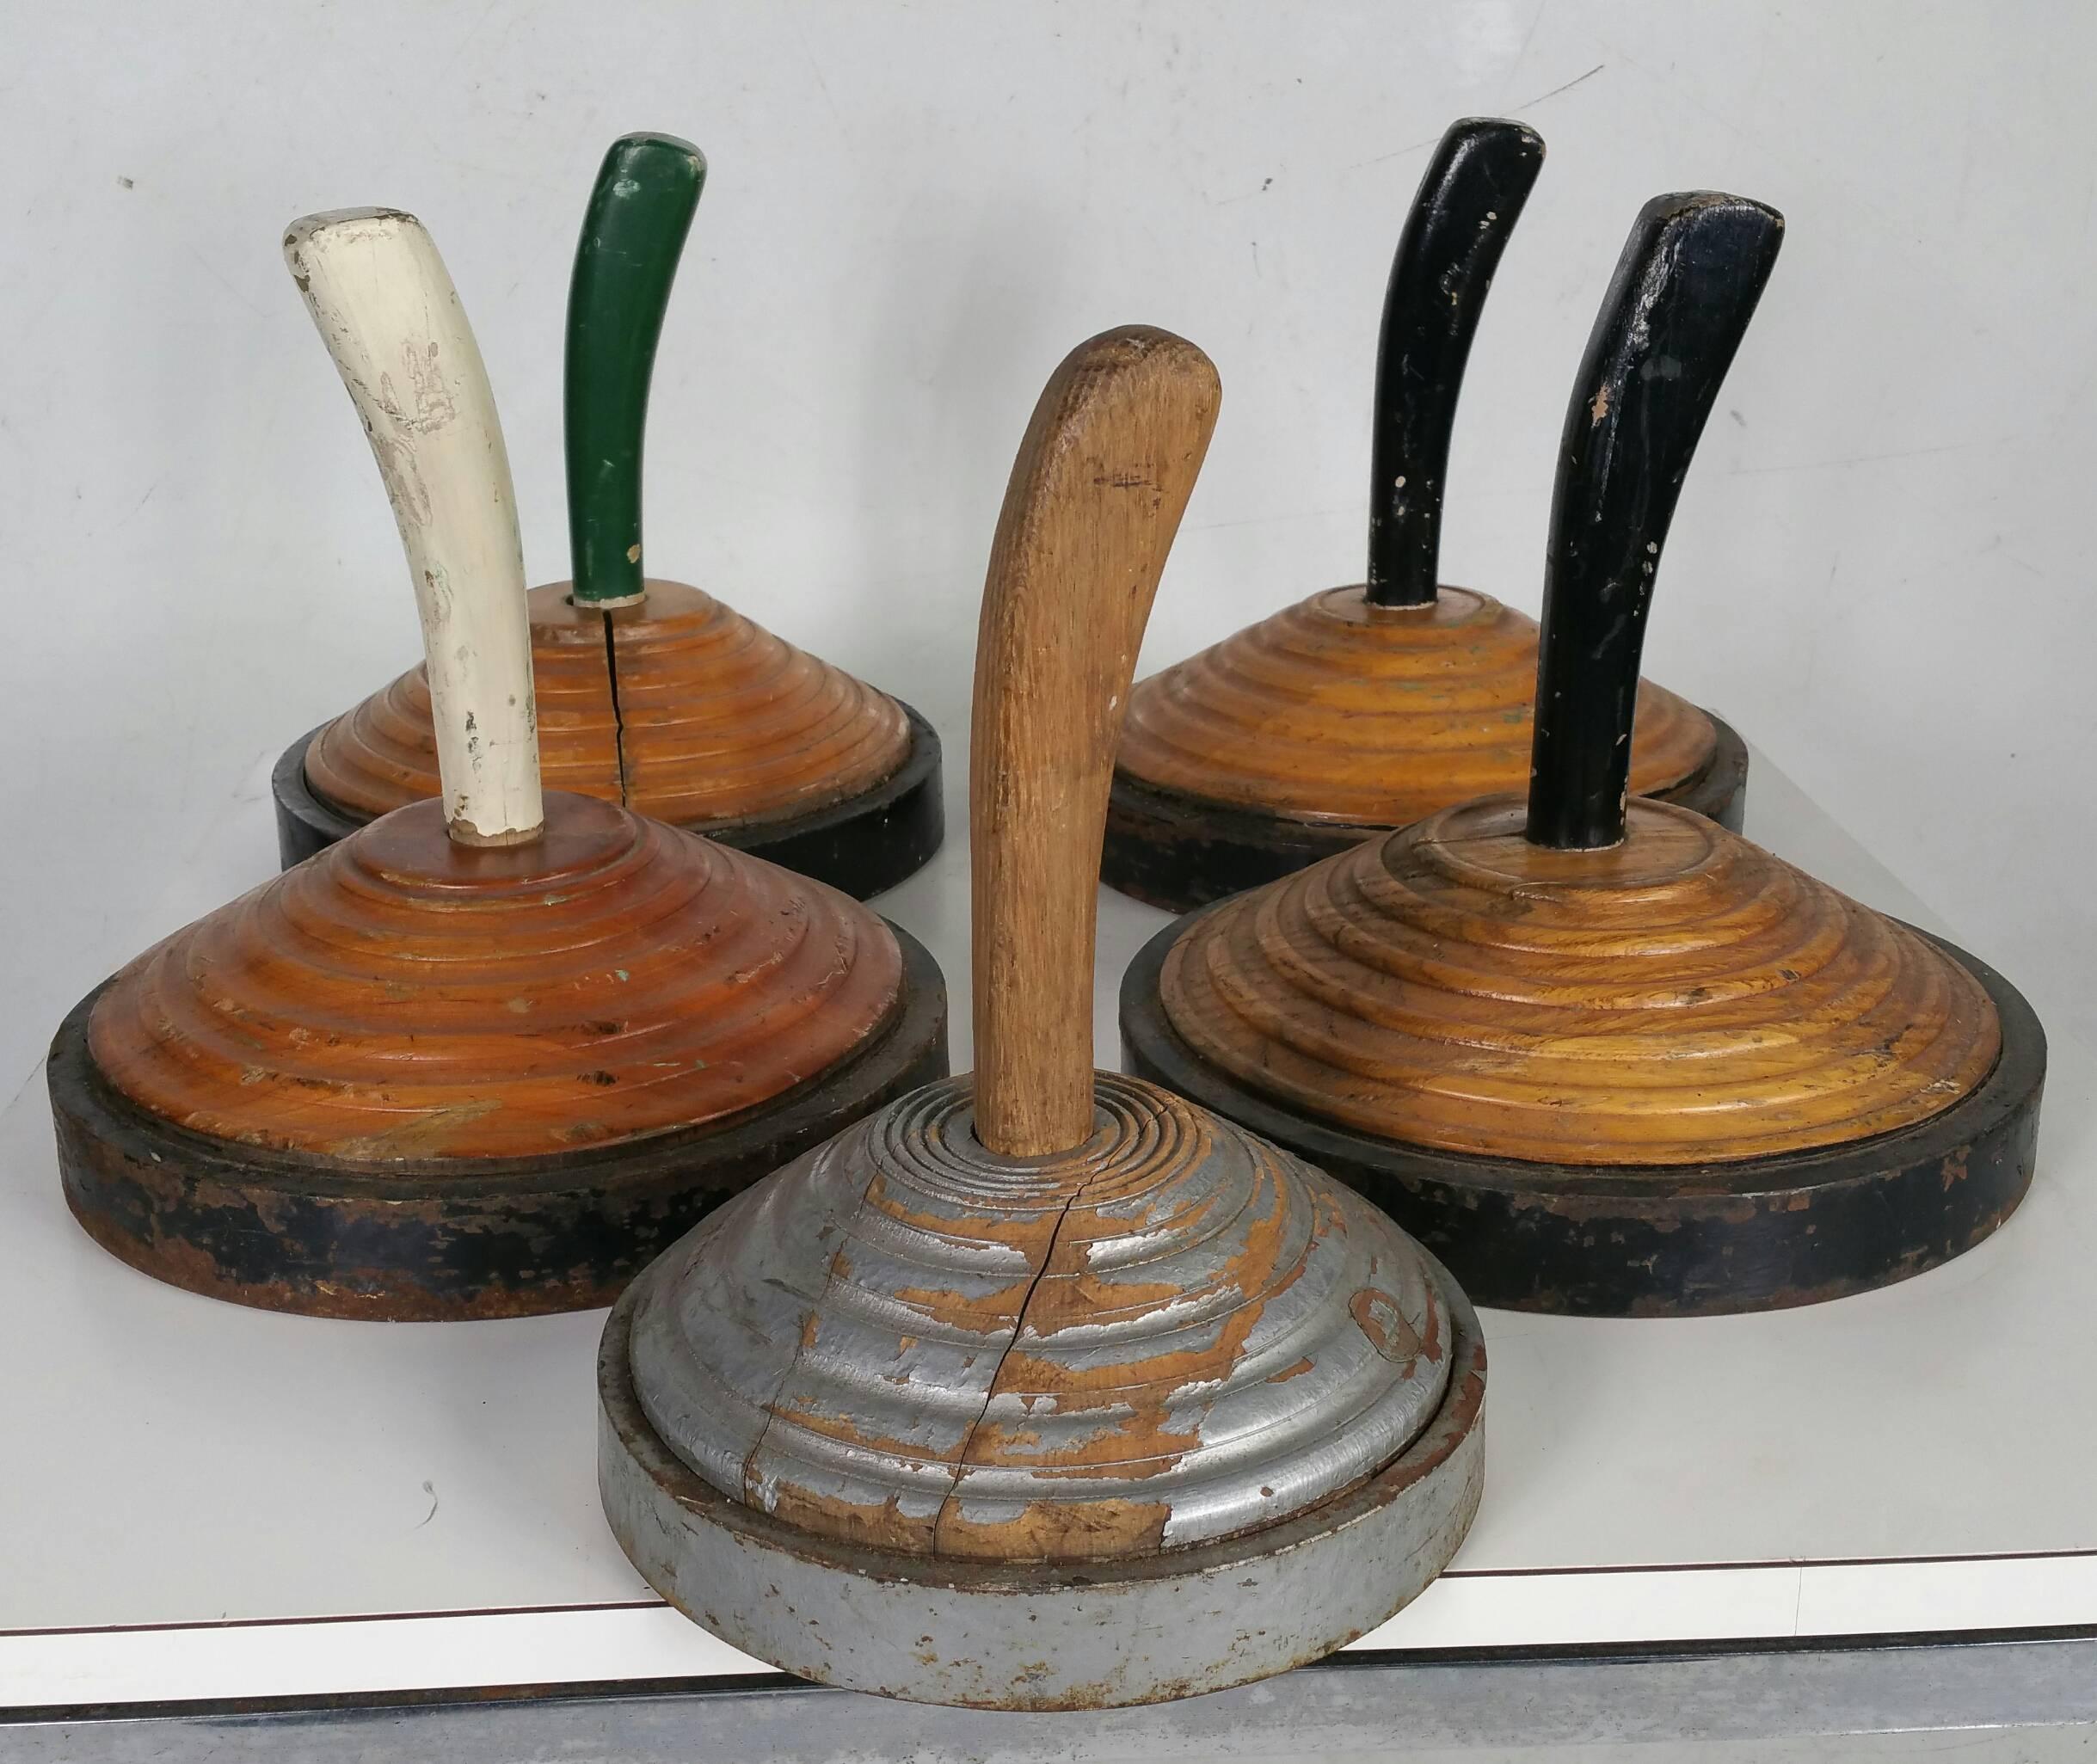 Great set of five wooden sculptural forms,, Possibly designed after curling stones..Wonderful color and patina..Art Deco Style.